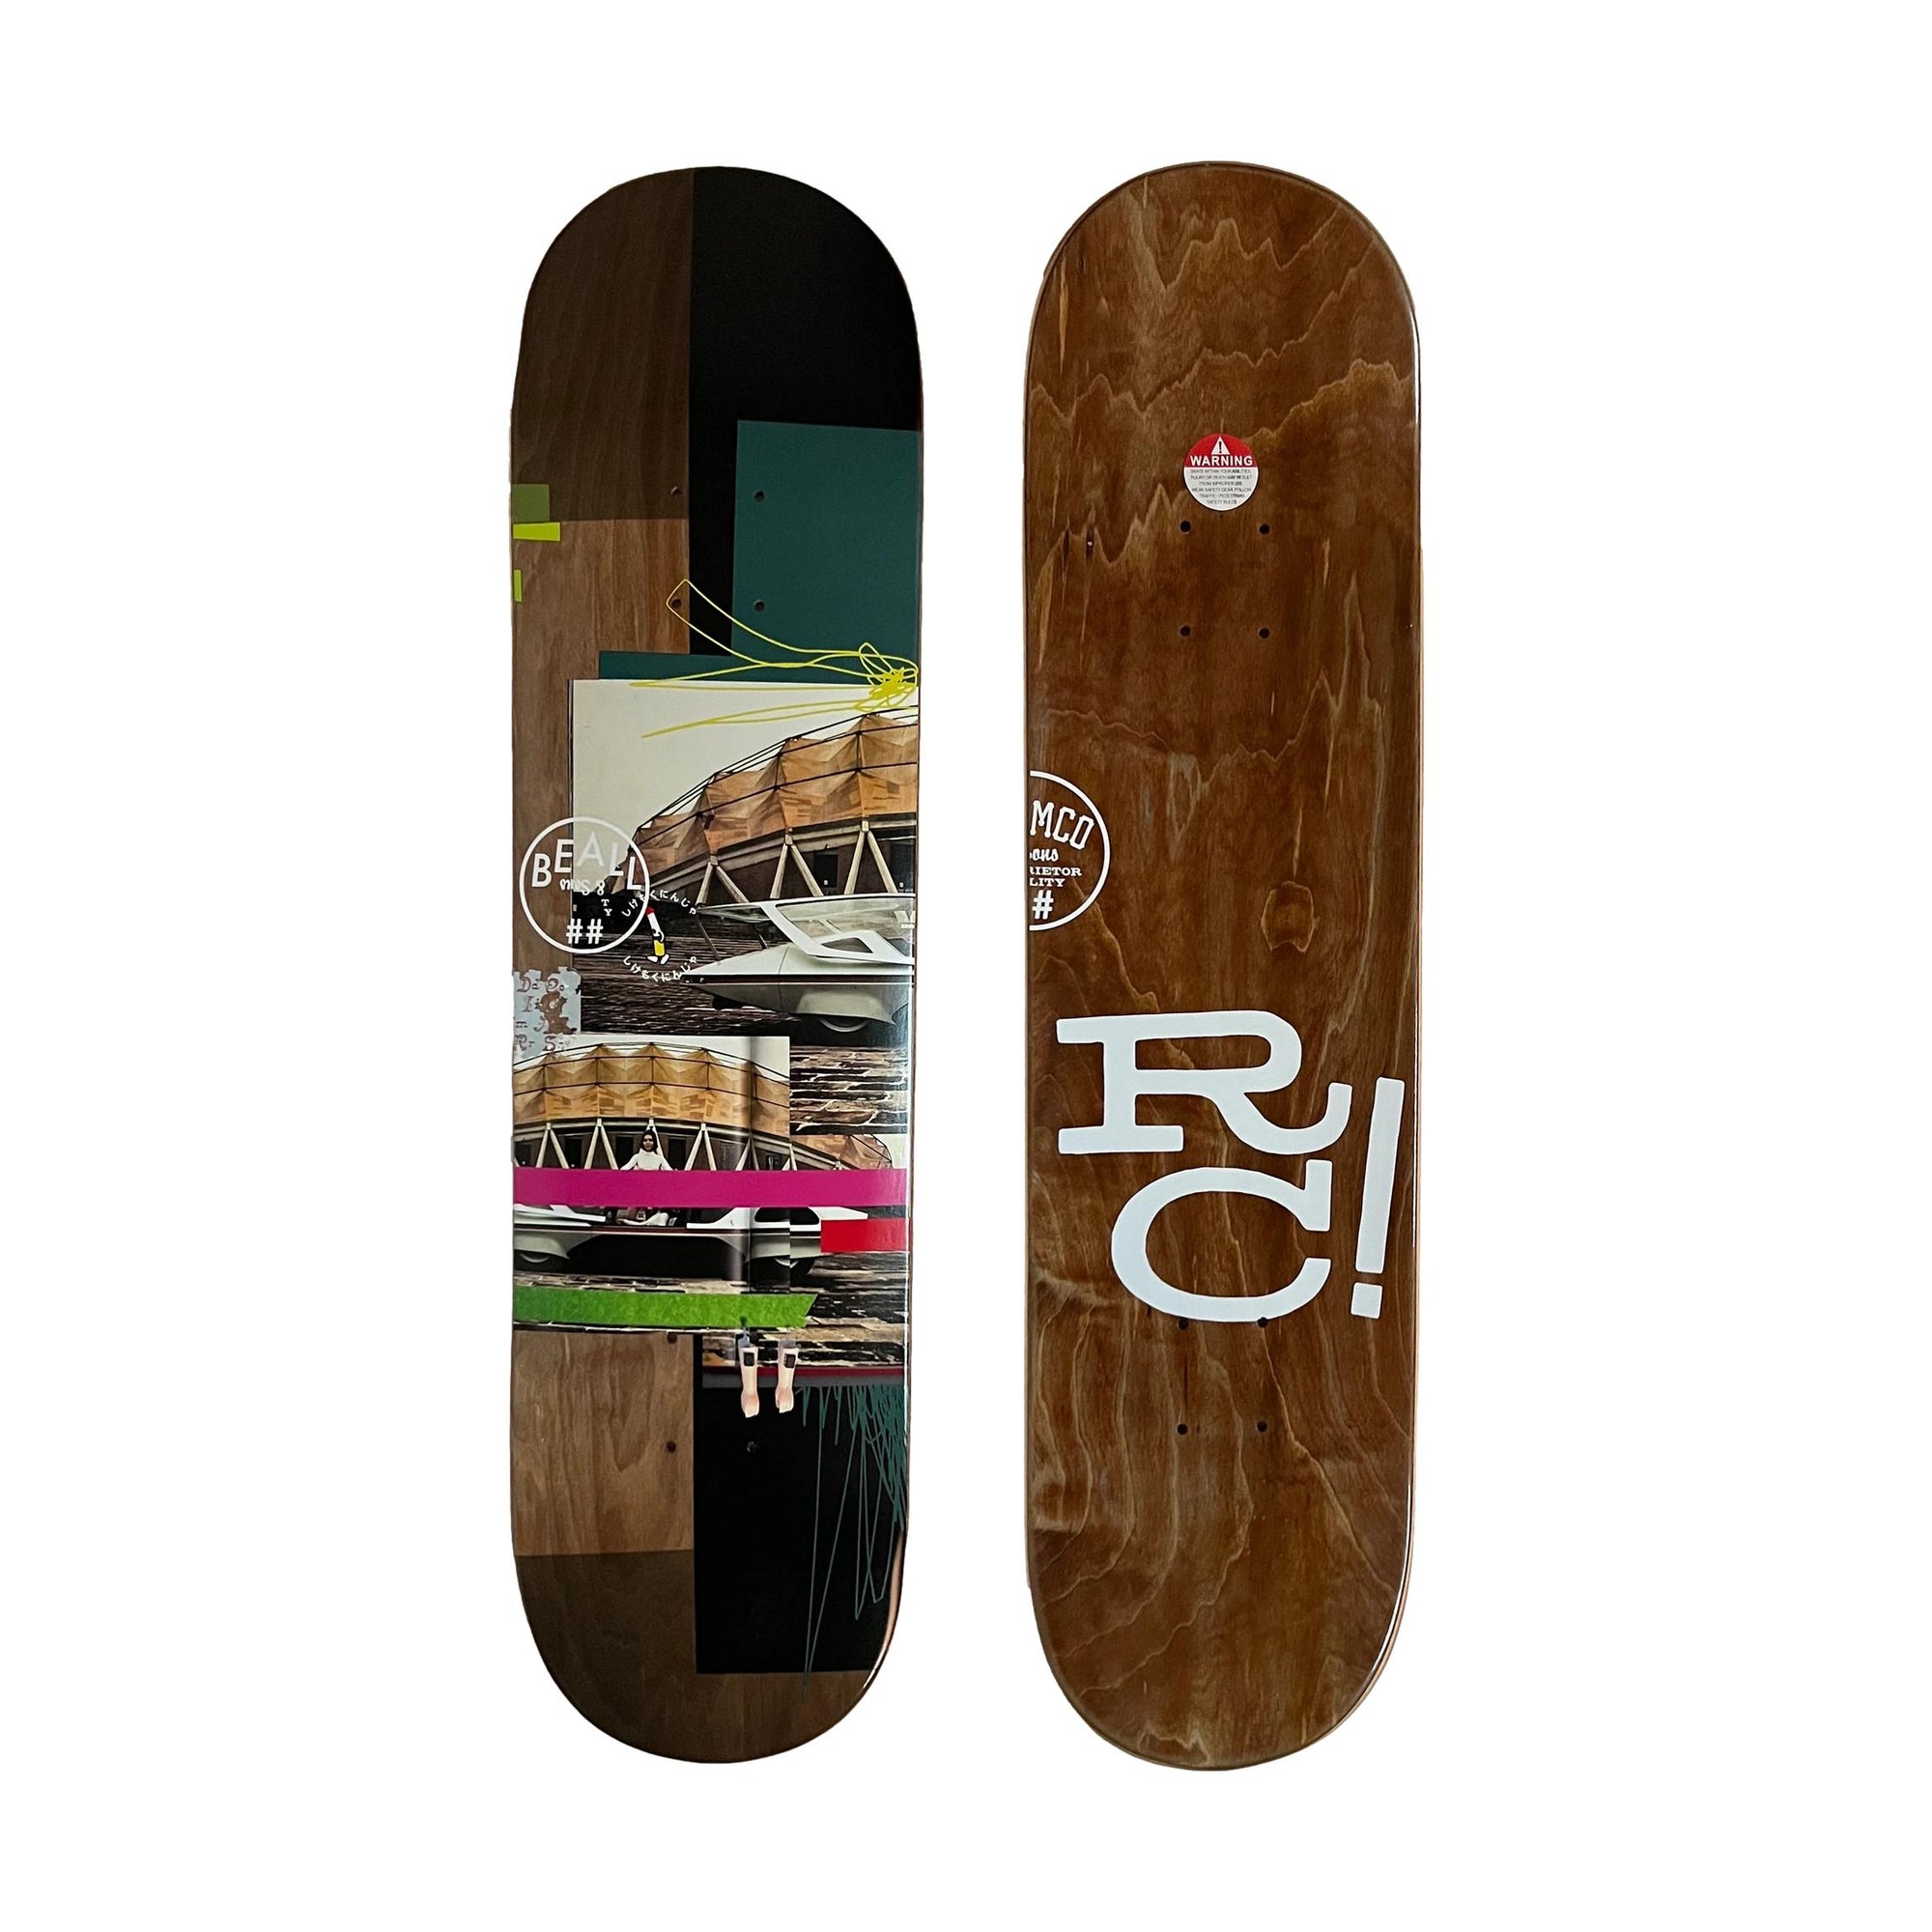 Scumco Ty Beall Supersonic 8.1" Deck - Venue Skateboards